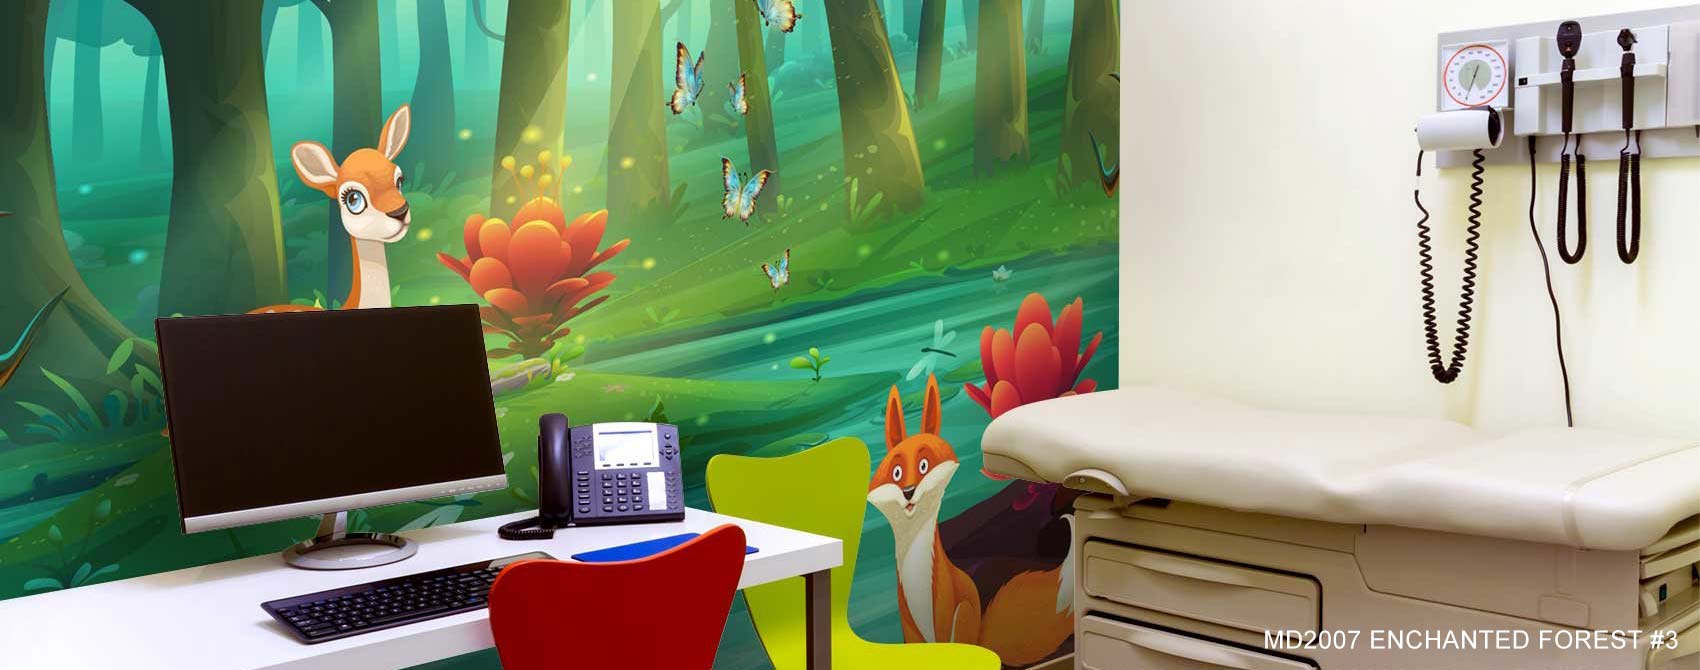 Enchanted Forest #3 Wall Mural in pediatric medical office